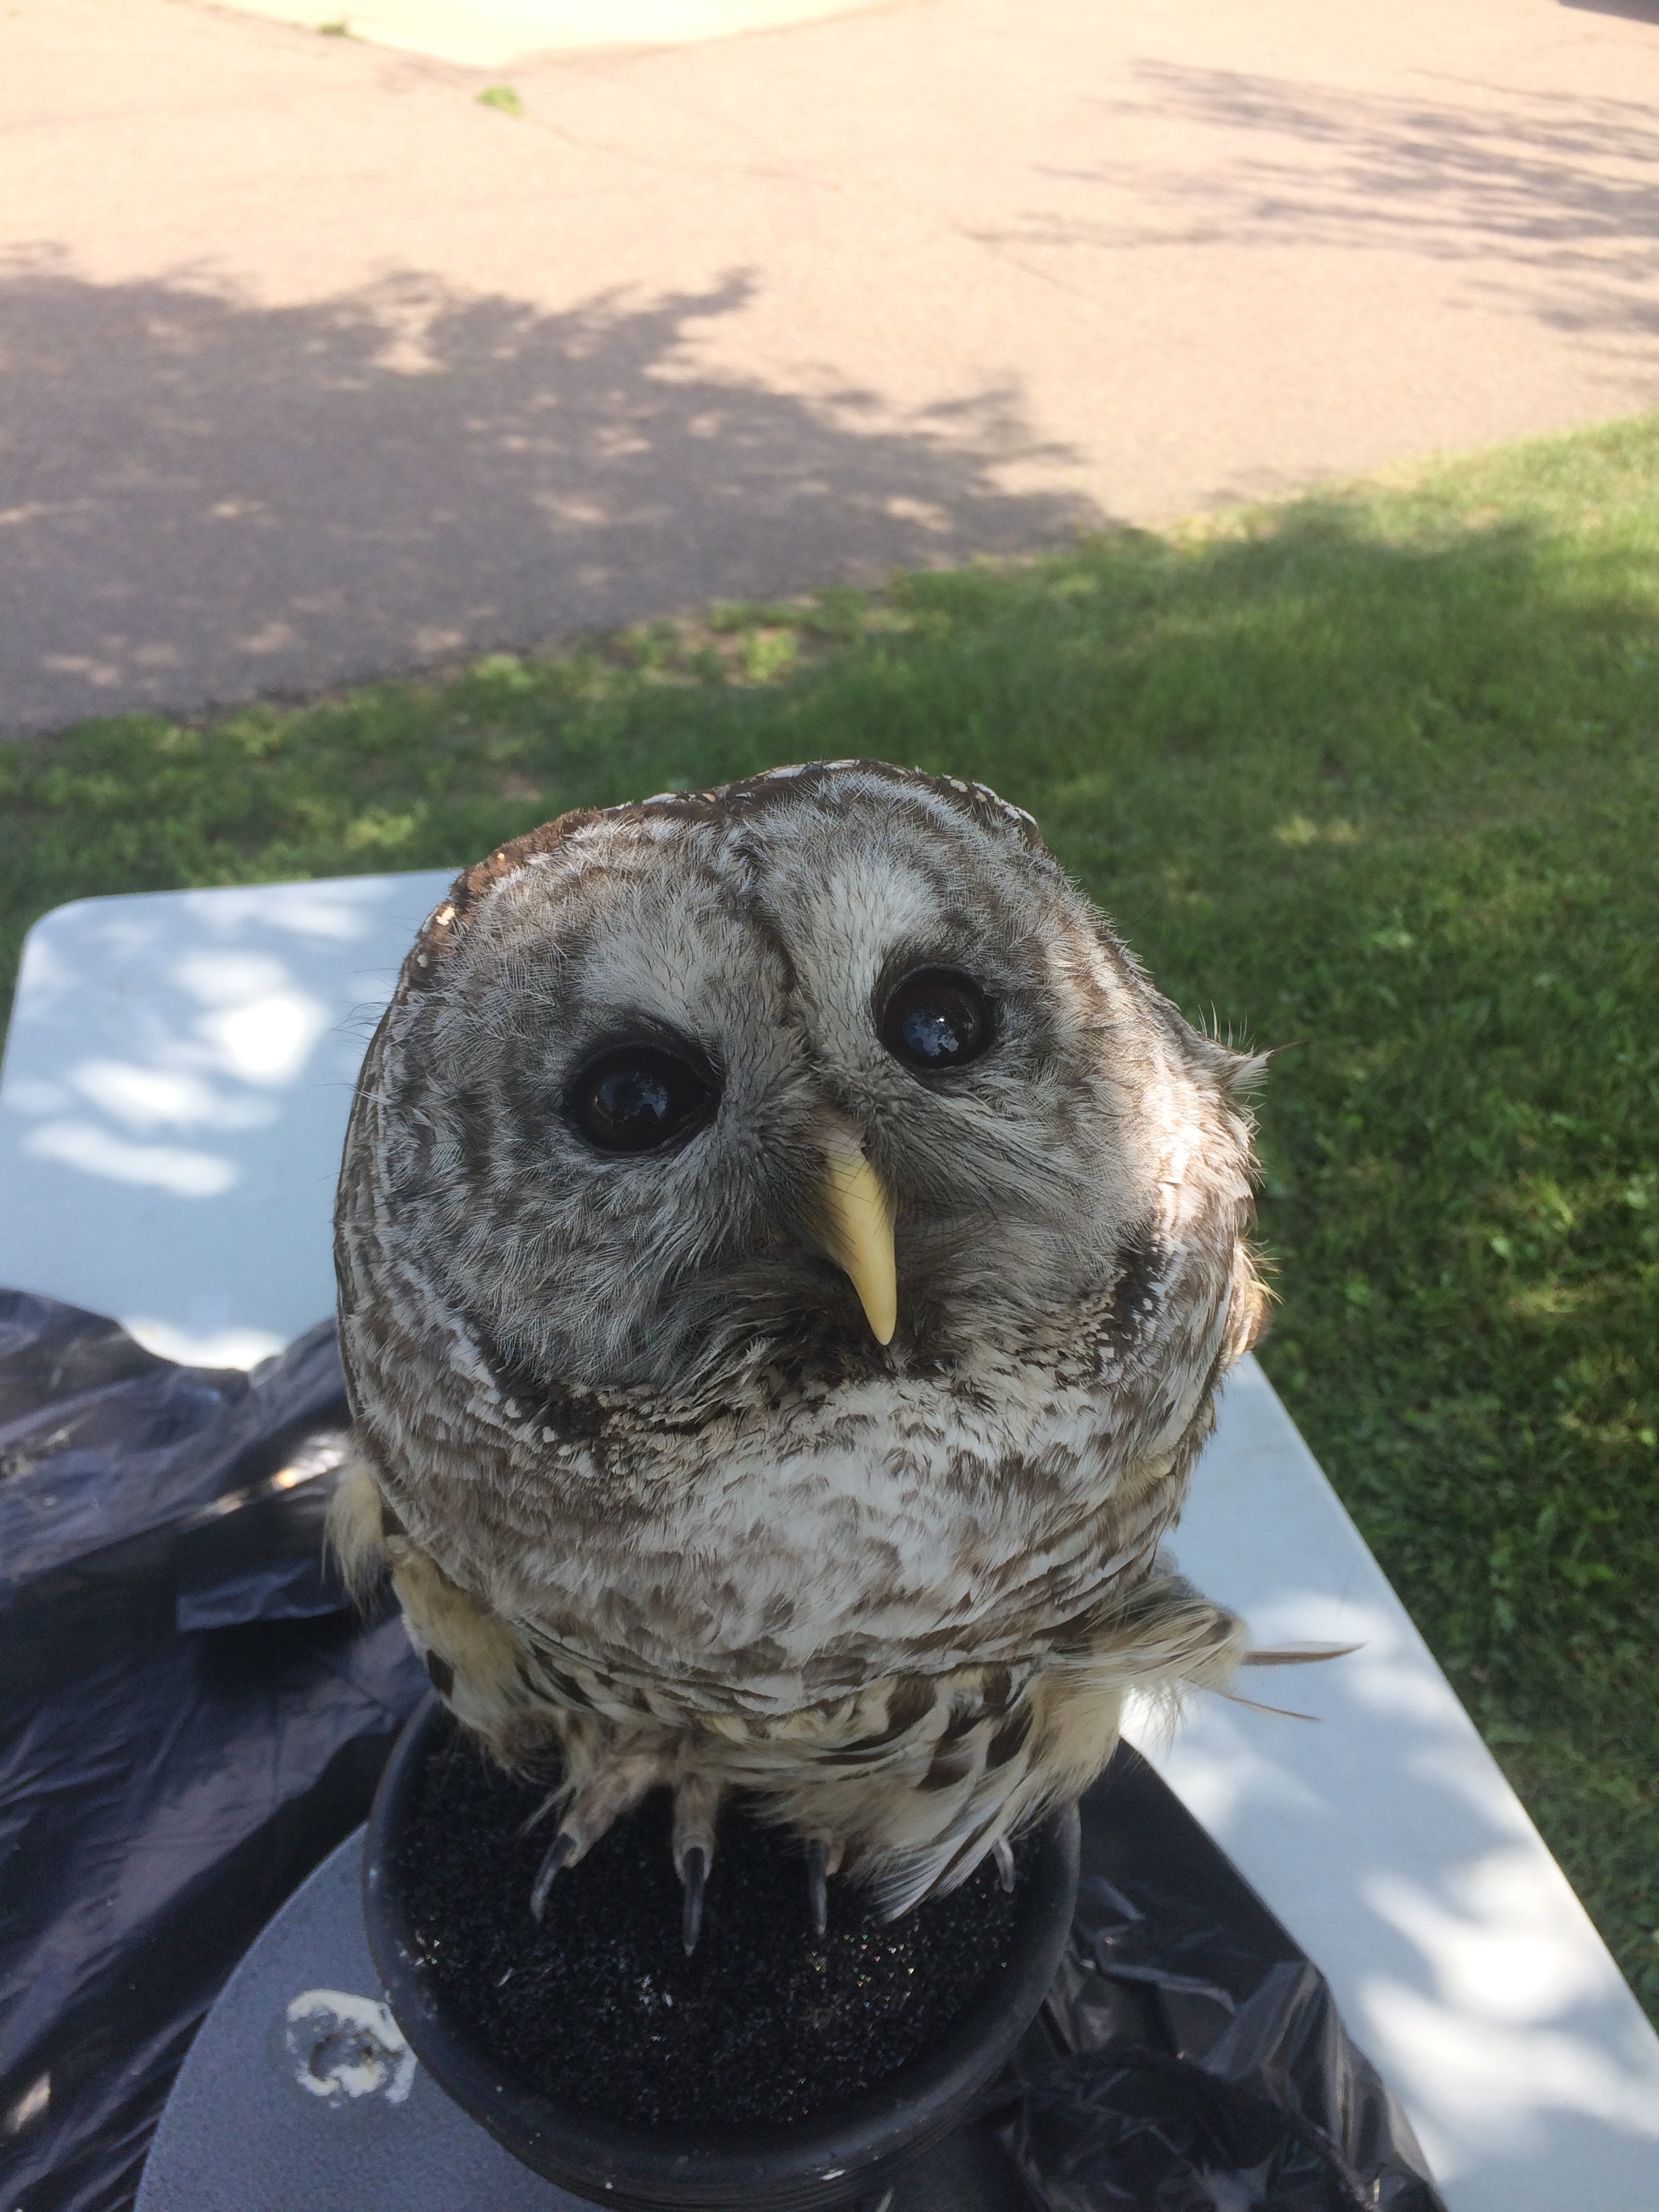 Special guest Colonel the Barred Owl visited during EALTs 10th Anniversary Tours of Ladyflower Gardens